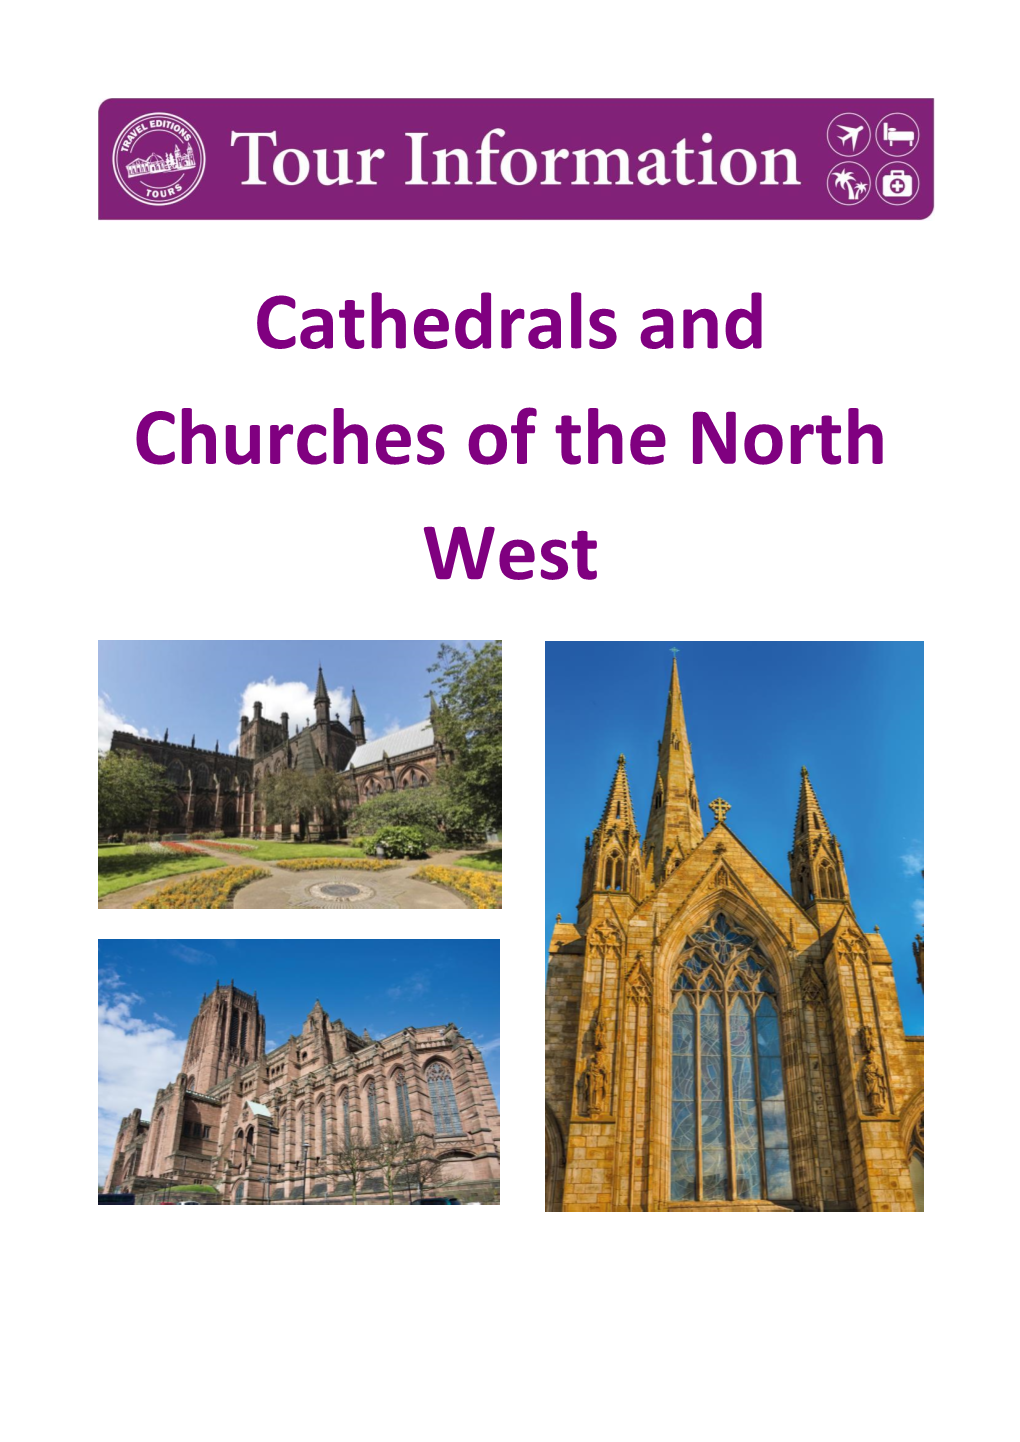 Cathedrals and Churches of the North West